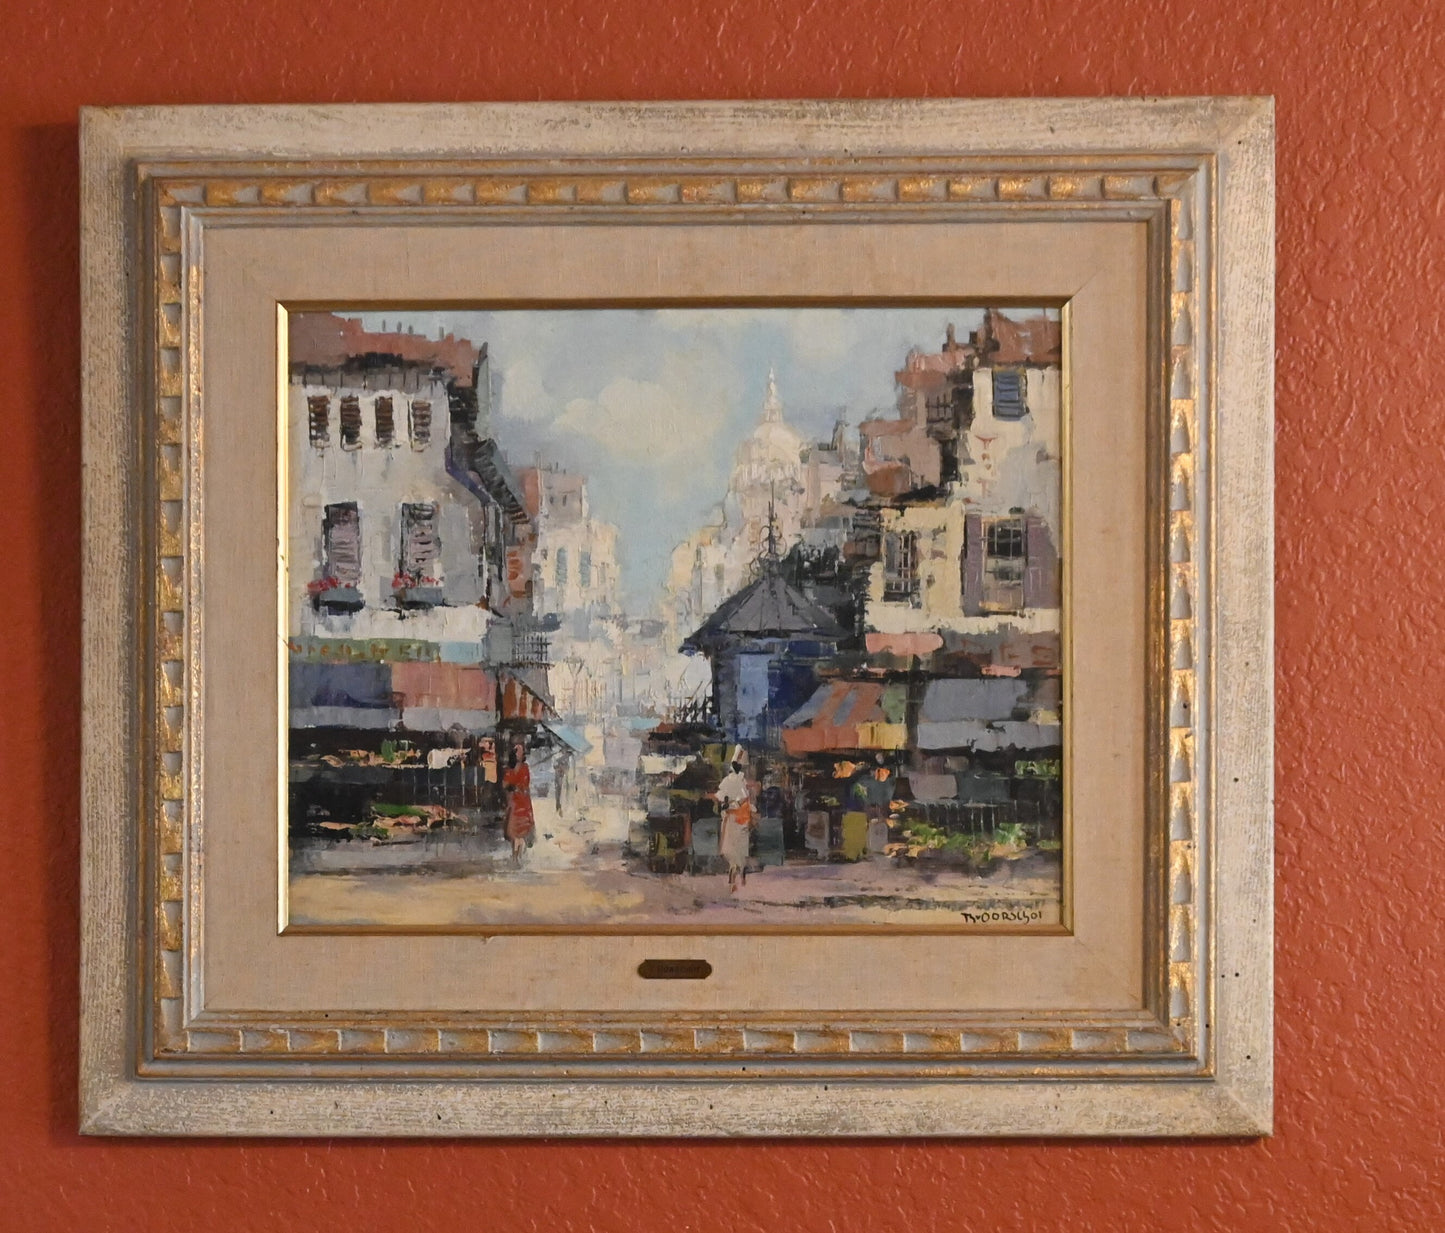 Theodore Van Oorschot (Dutch 1910-1989 ) Large Original Impressionist Oil -26.5" x 30.5"W- featured in Museums- high auction & galley prices